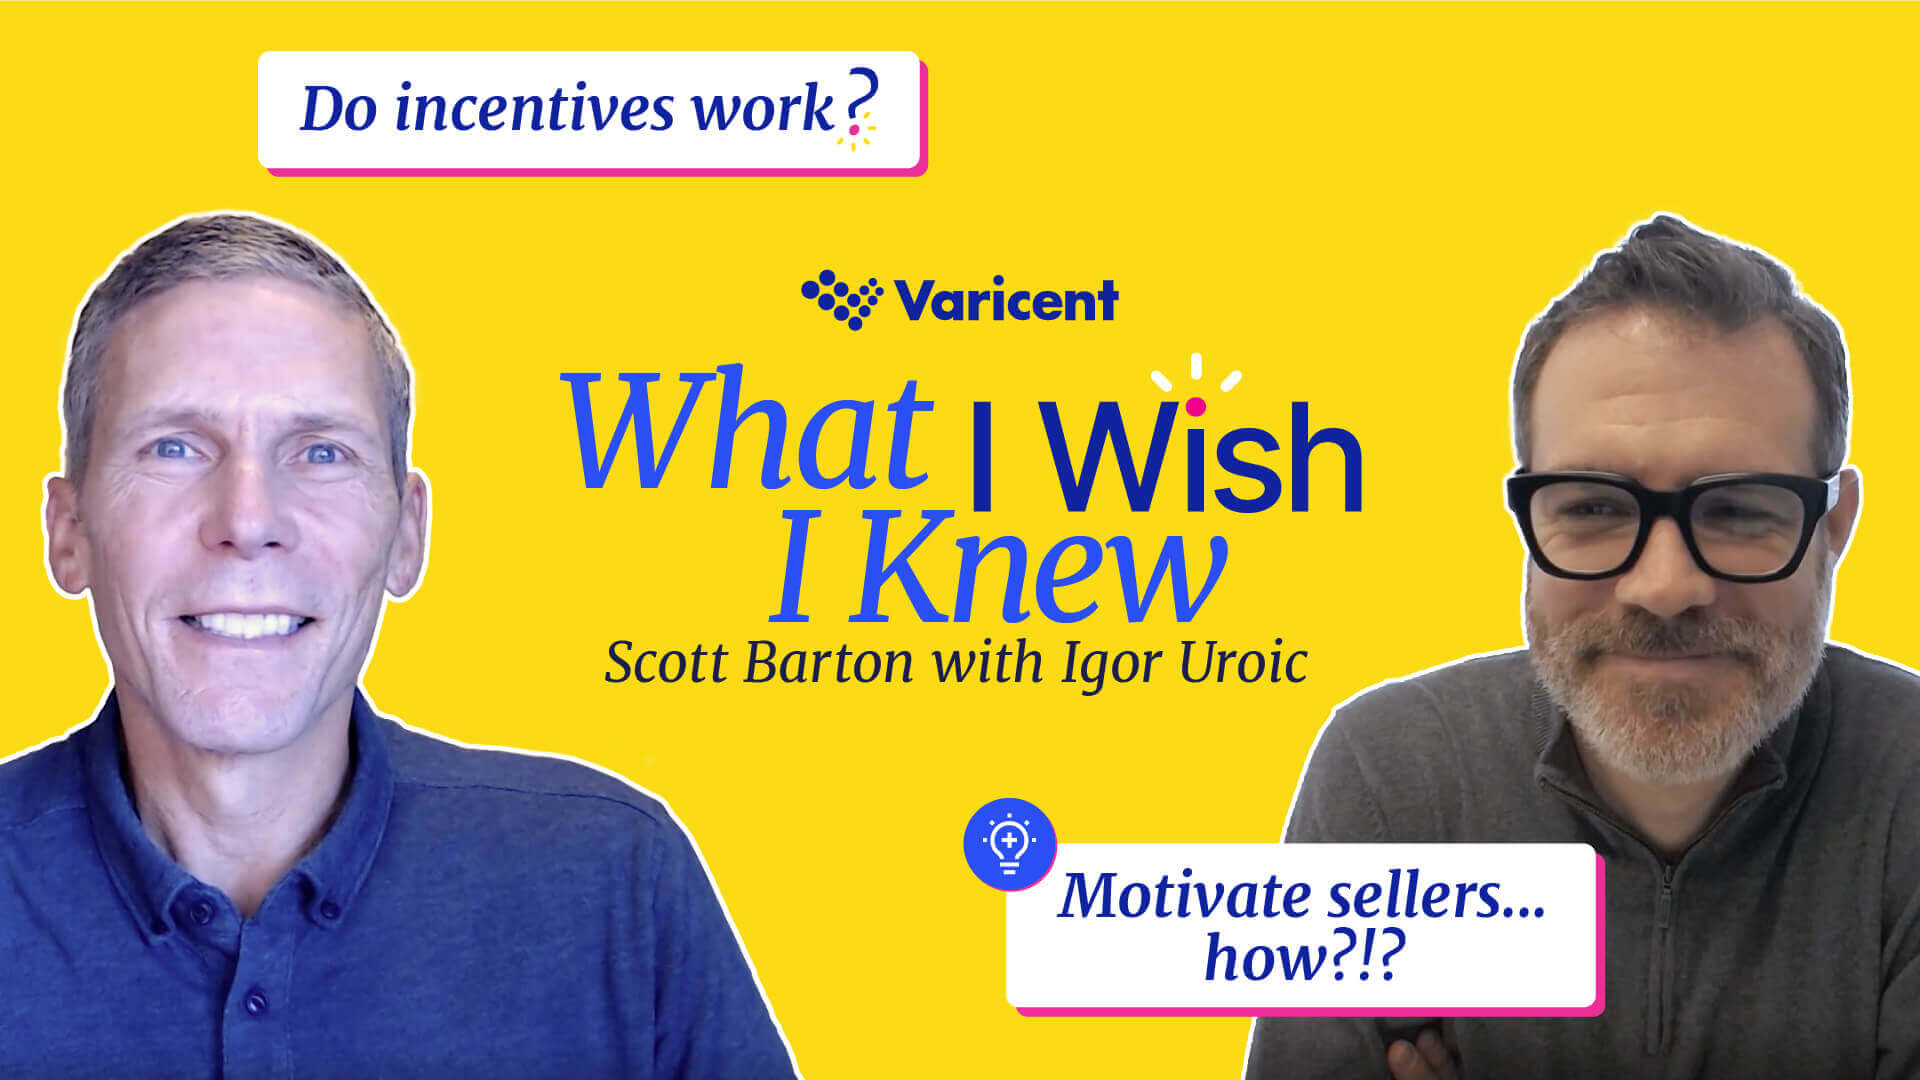 Learn how to motivate your sellers to grow their ACV using sales incentives 